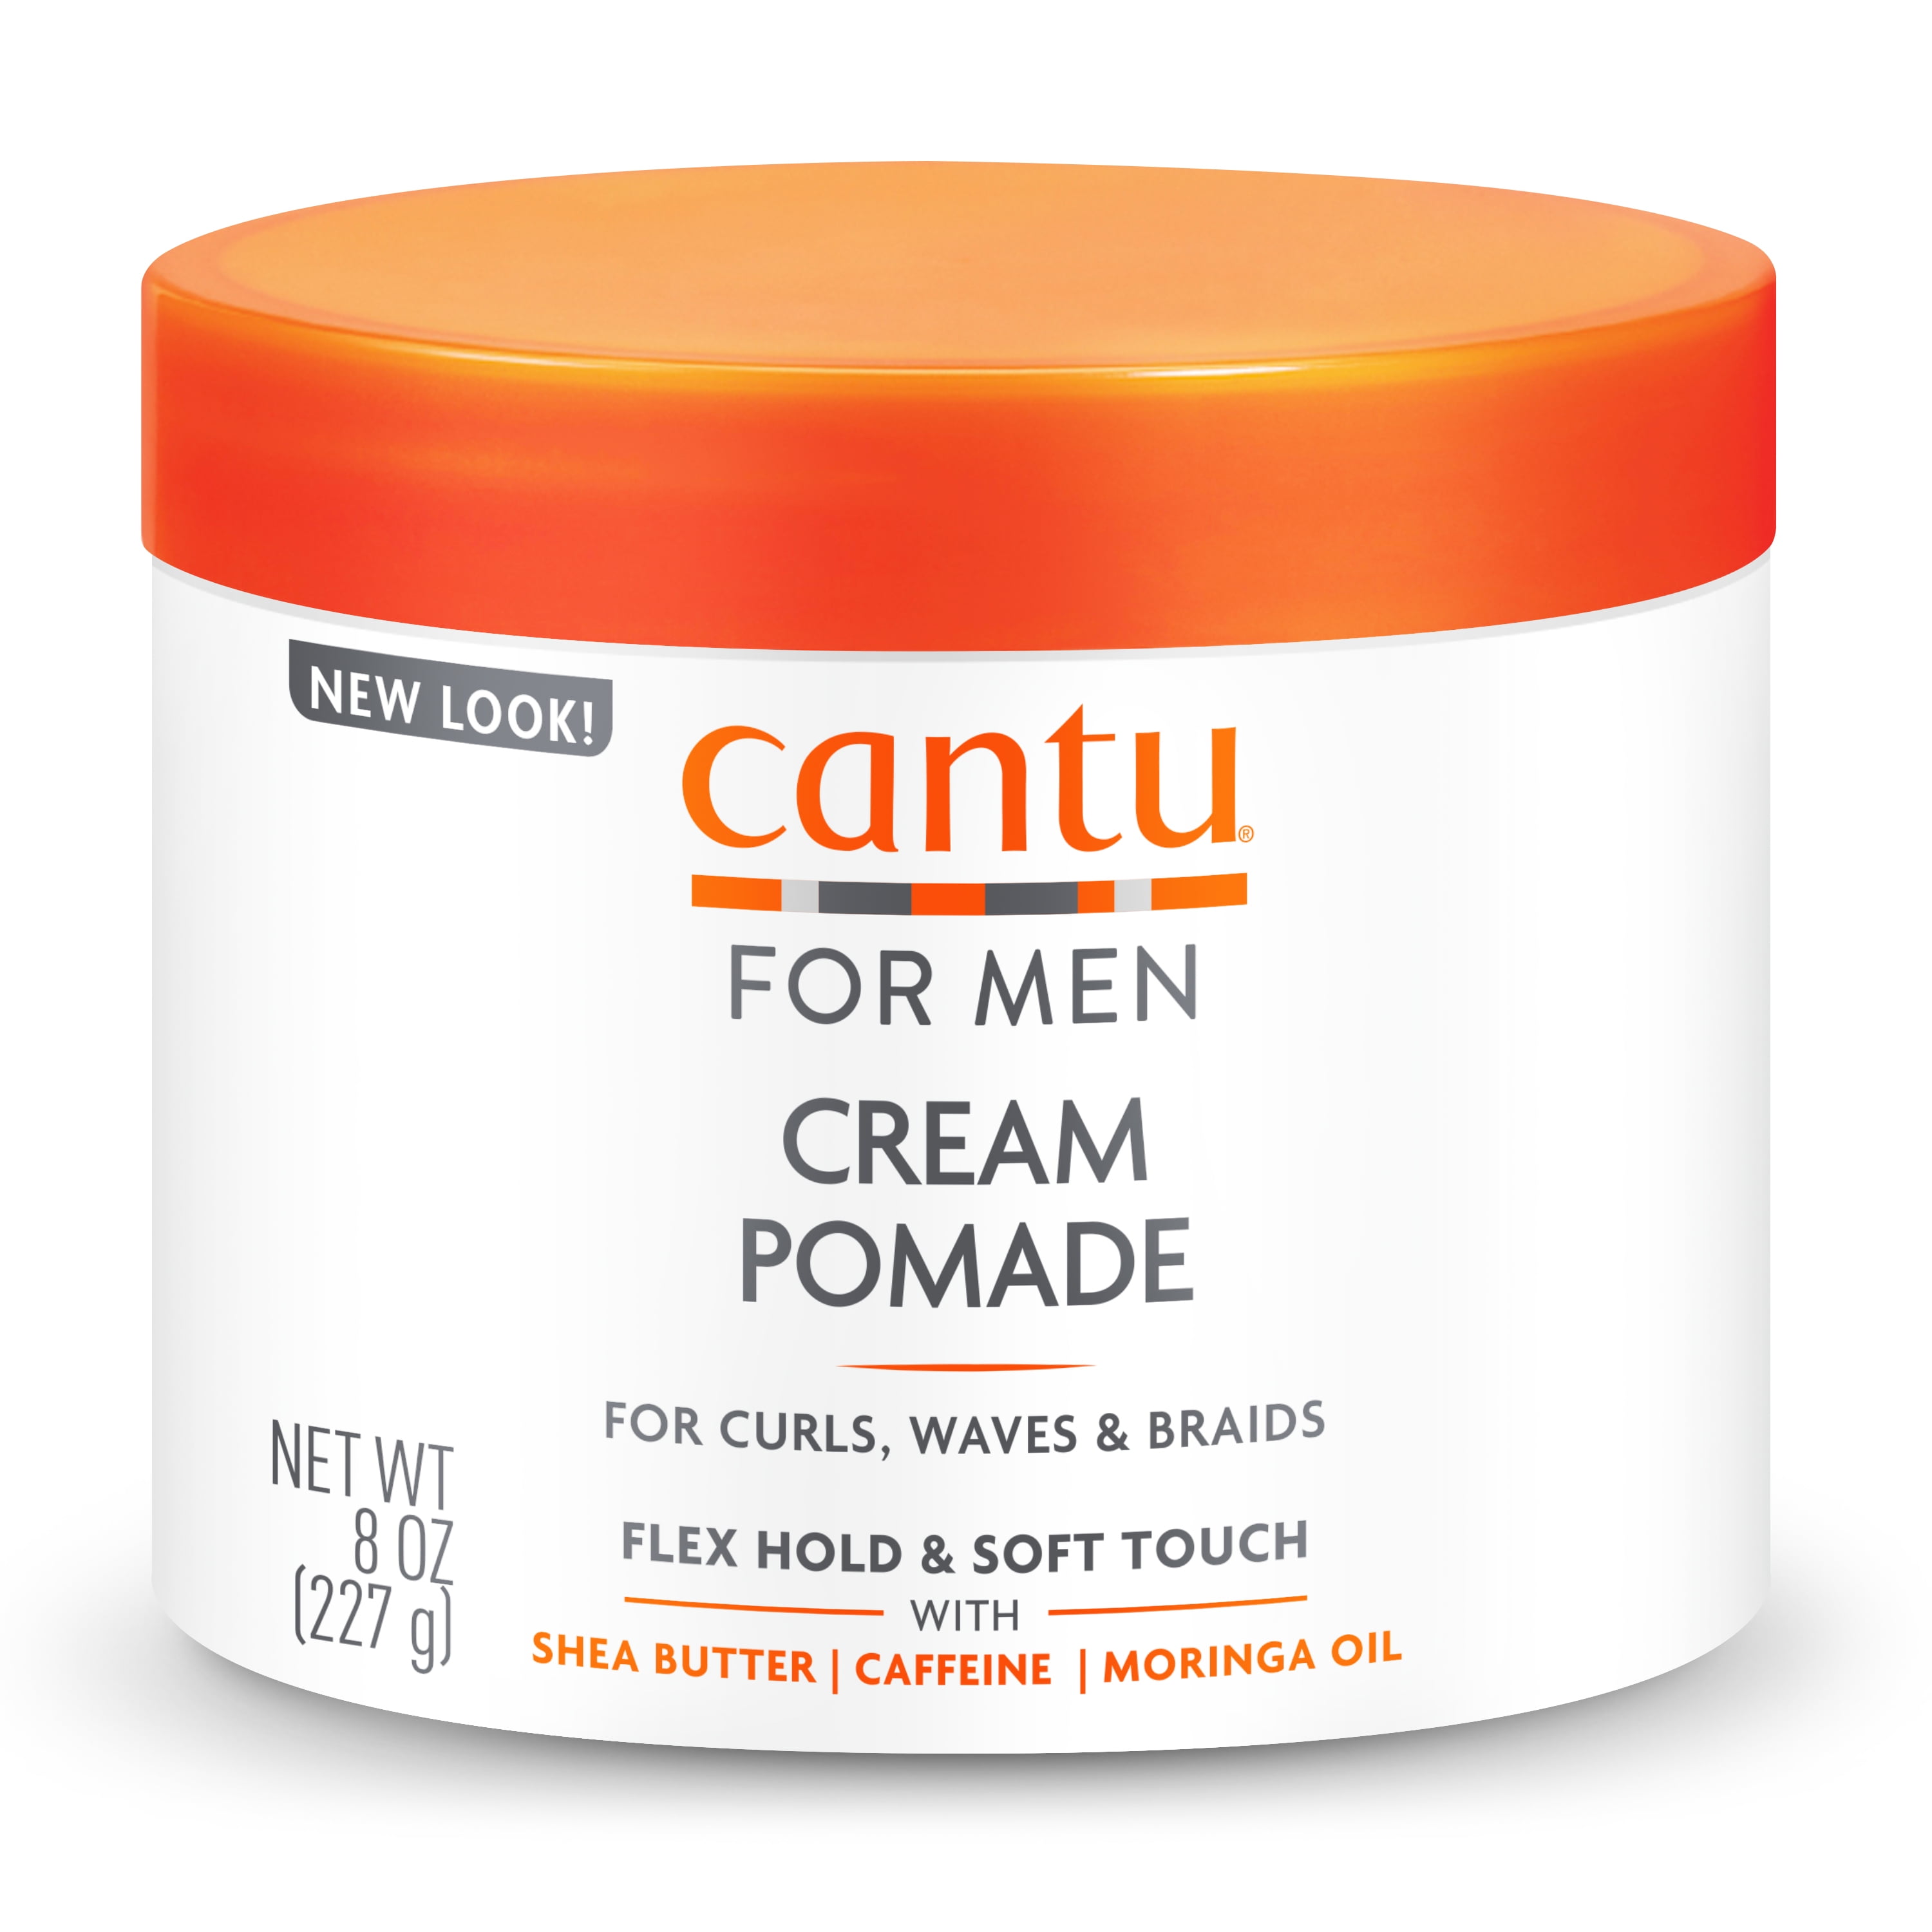 Cantu for Men Cream Pomade with Flexible Hold, 8 oz 